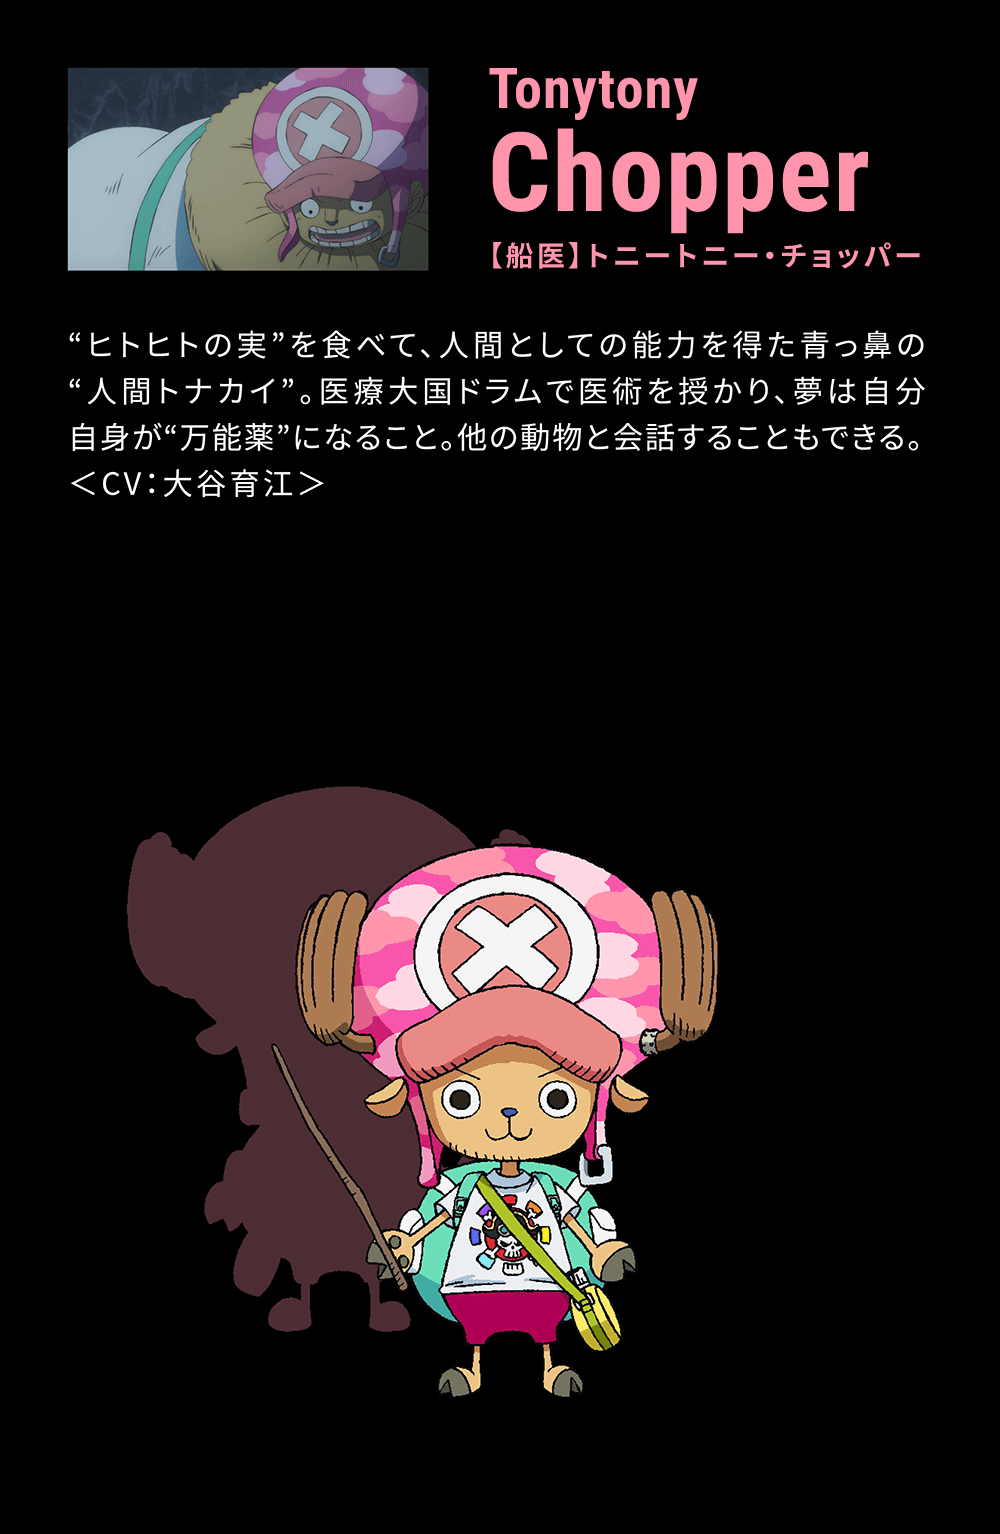 Character キャラクター 劇場版 One Piece Stampede 公式サイト